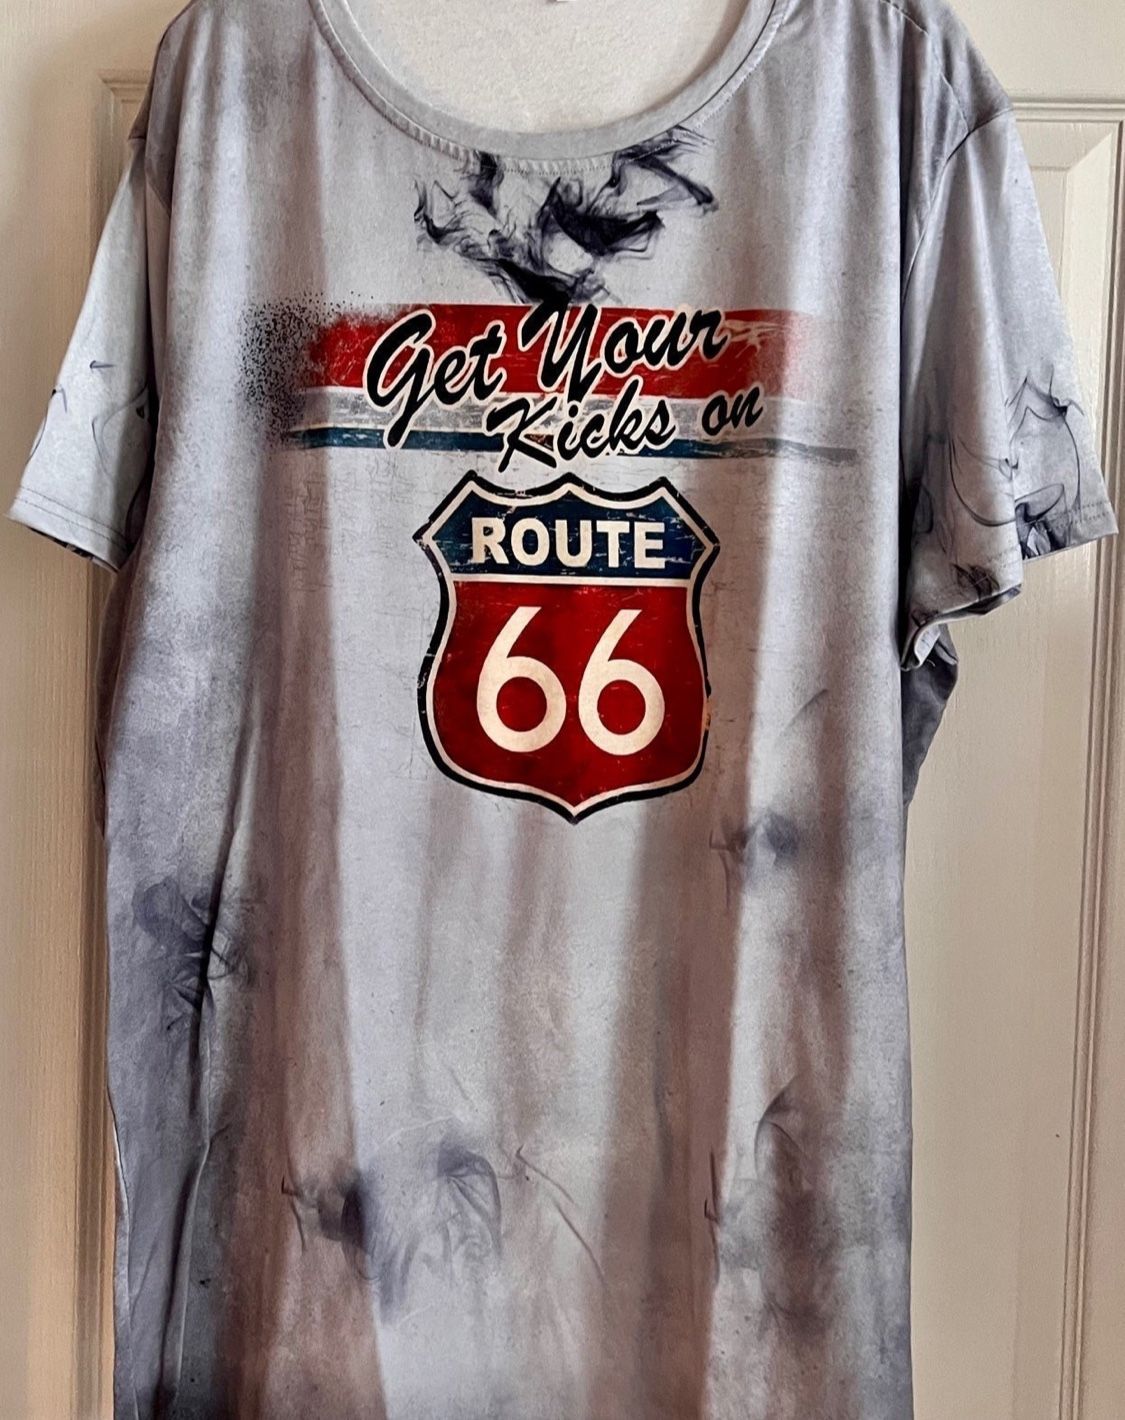 Men’s New Route 66 Tee Shirt. Size 2XL